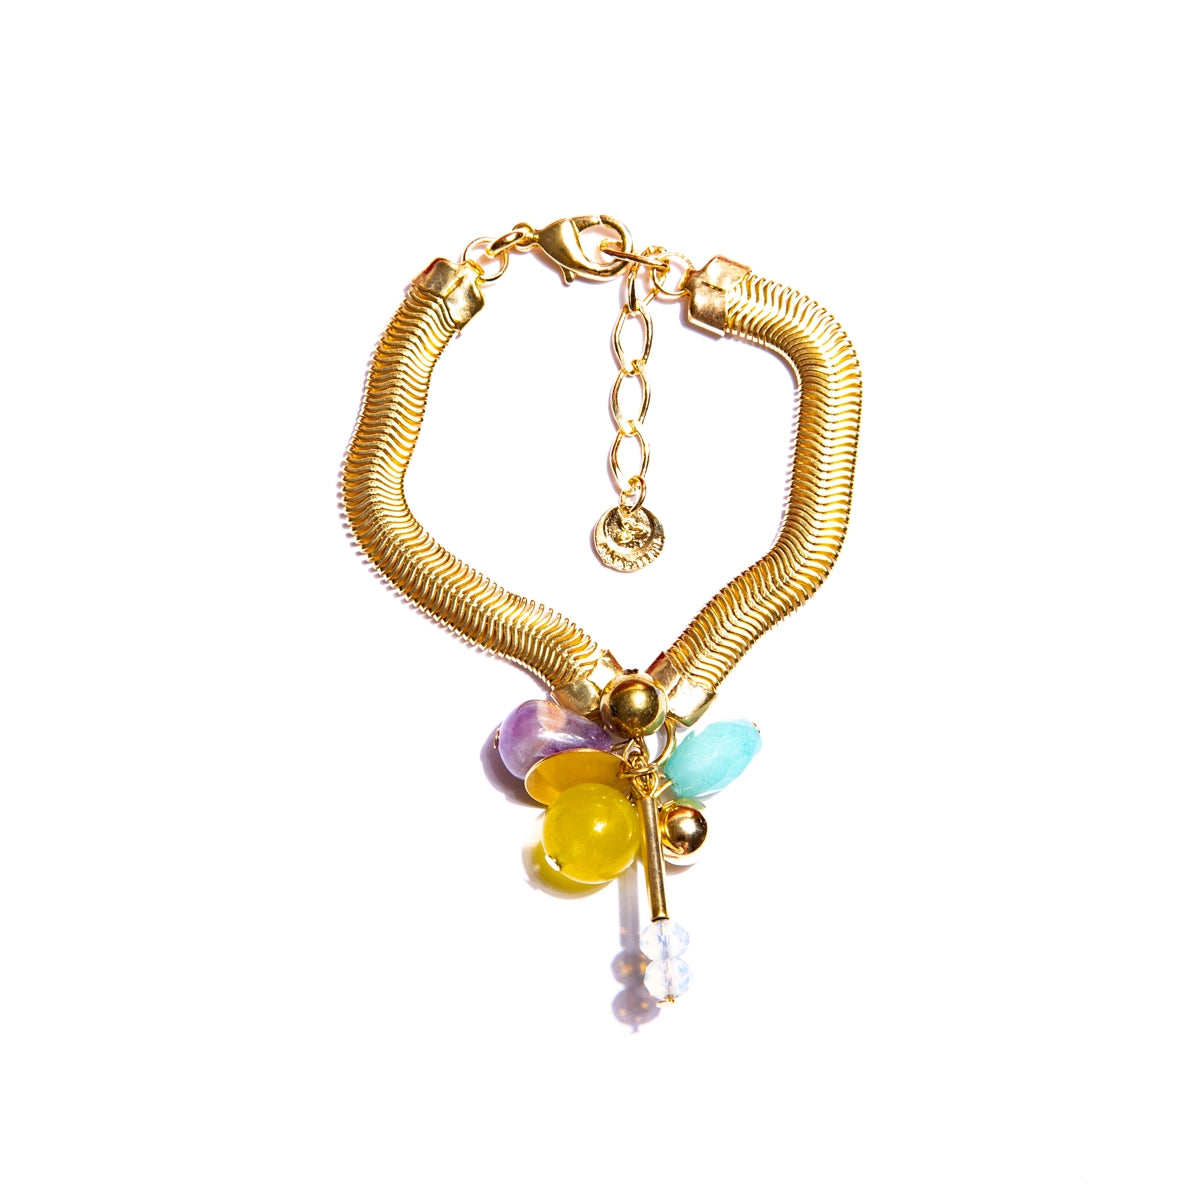 Bracelet with thick chain, natural stones amethyst, amazonite, lemon jade, hematite, and gold-plated metals